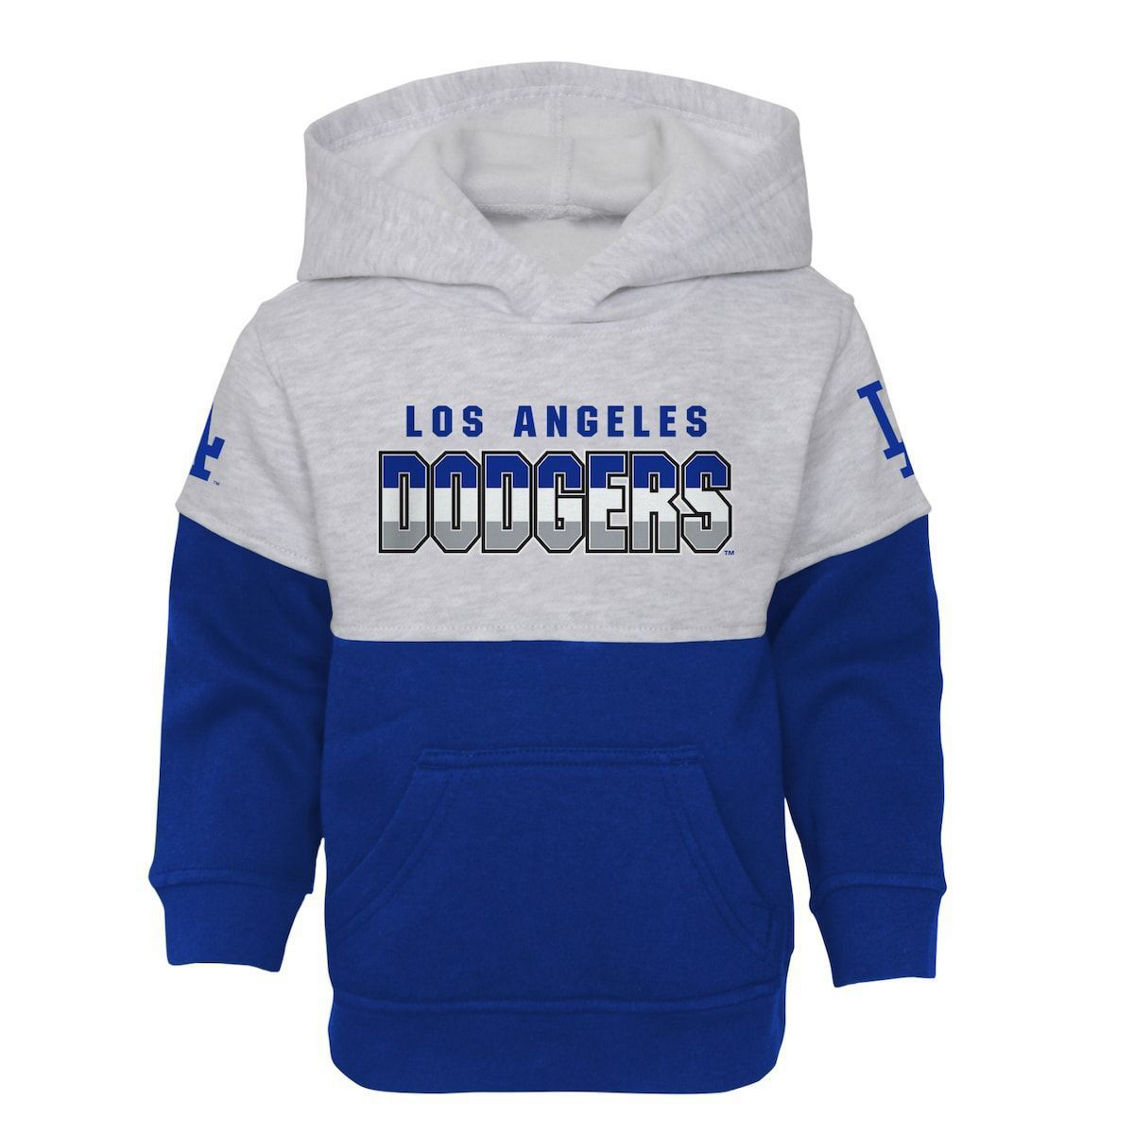 Outerstuff Infant Royal/Heather Gray Los Angeles Dodgers Playmaker Pullover Hoodie & Pants Set - Image 3 of 4